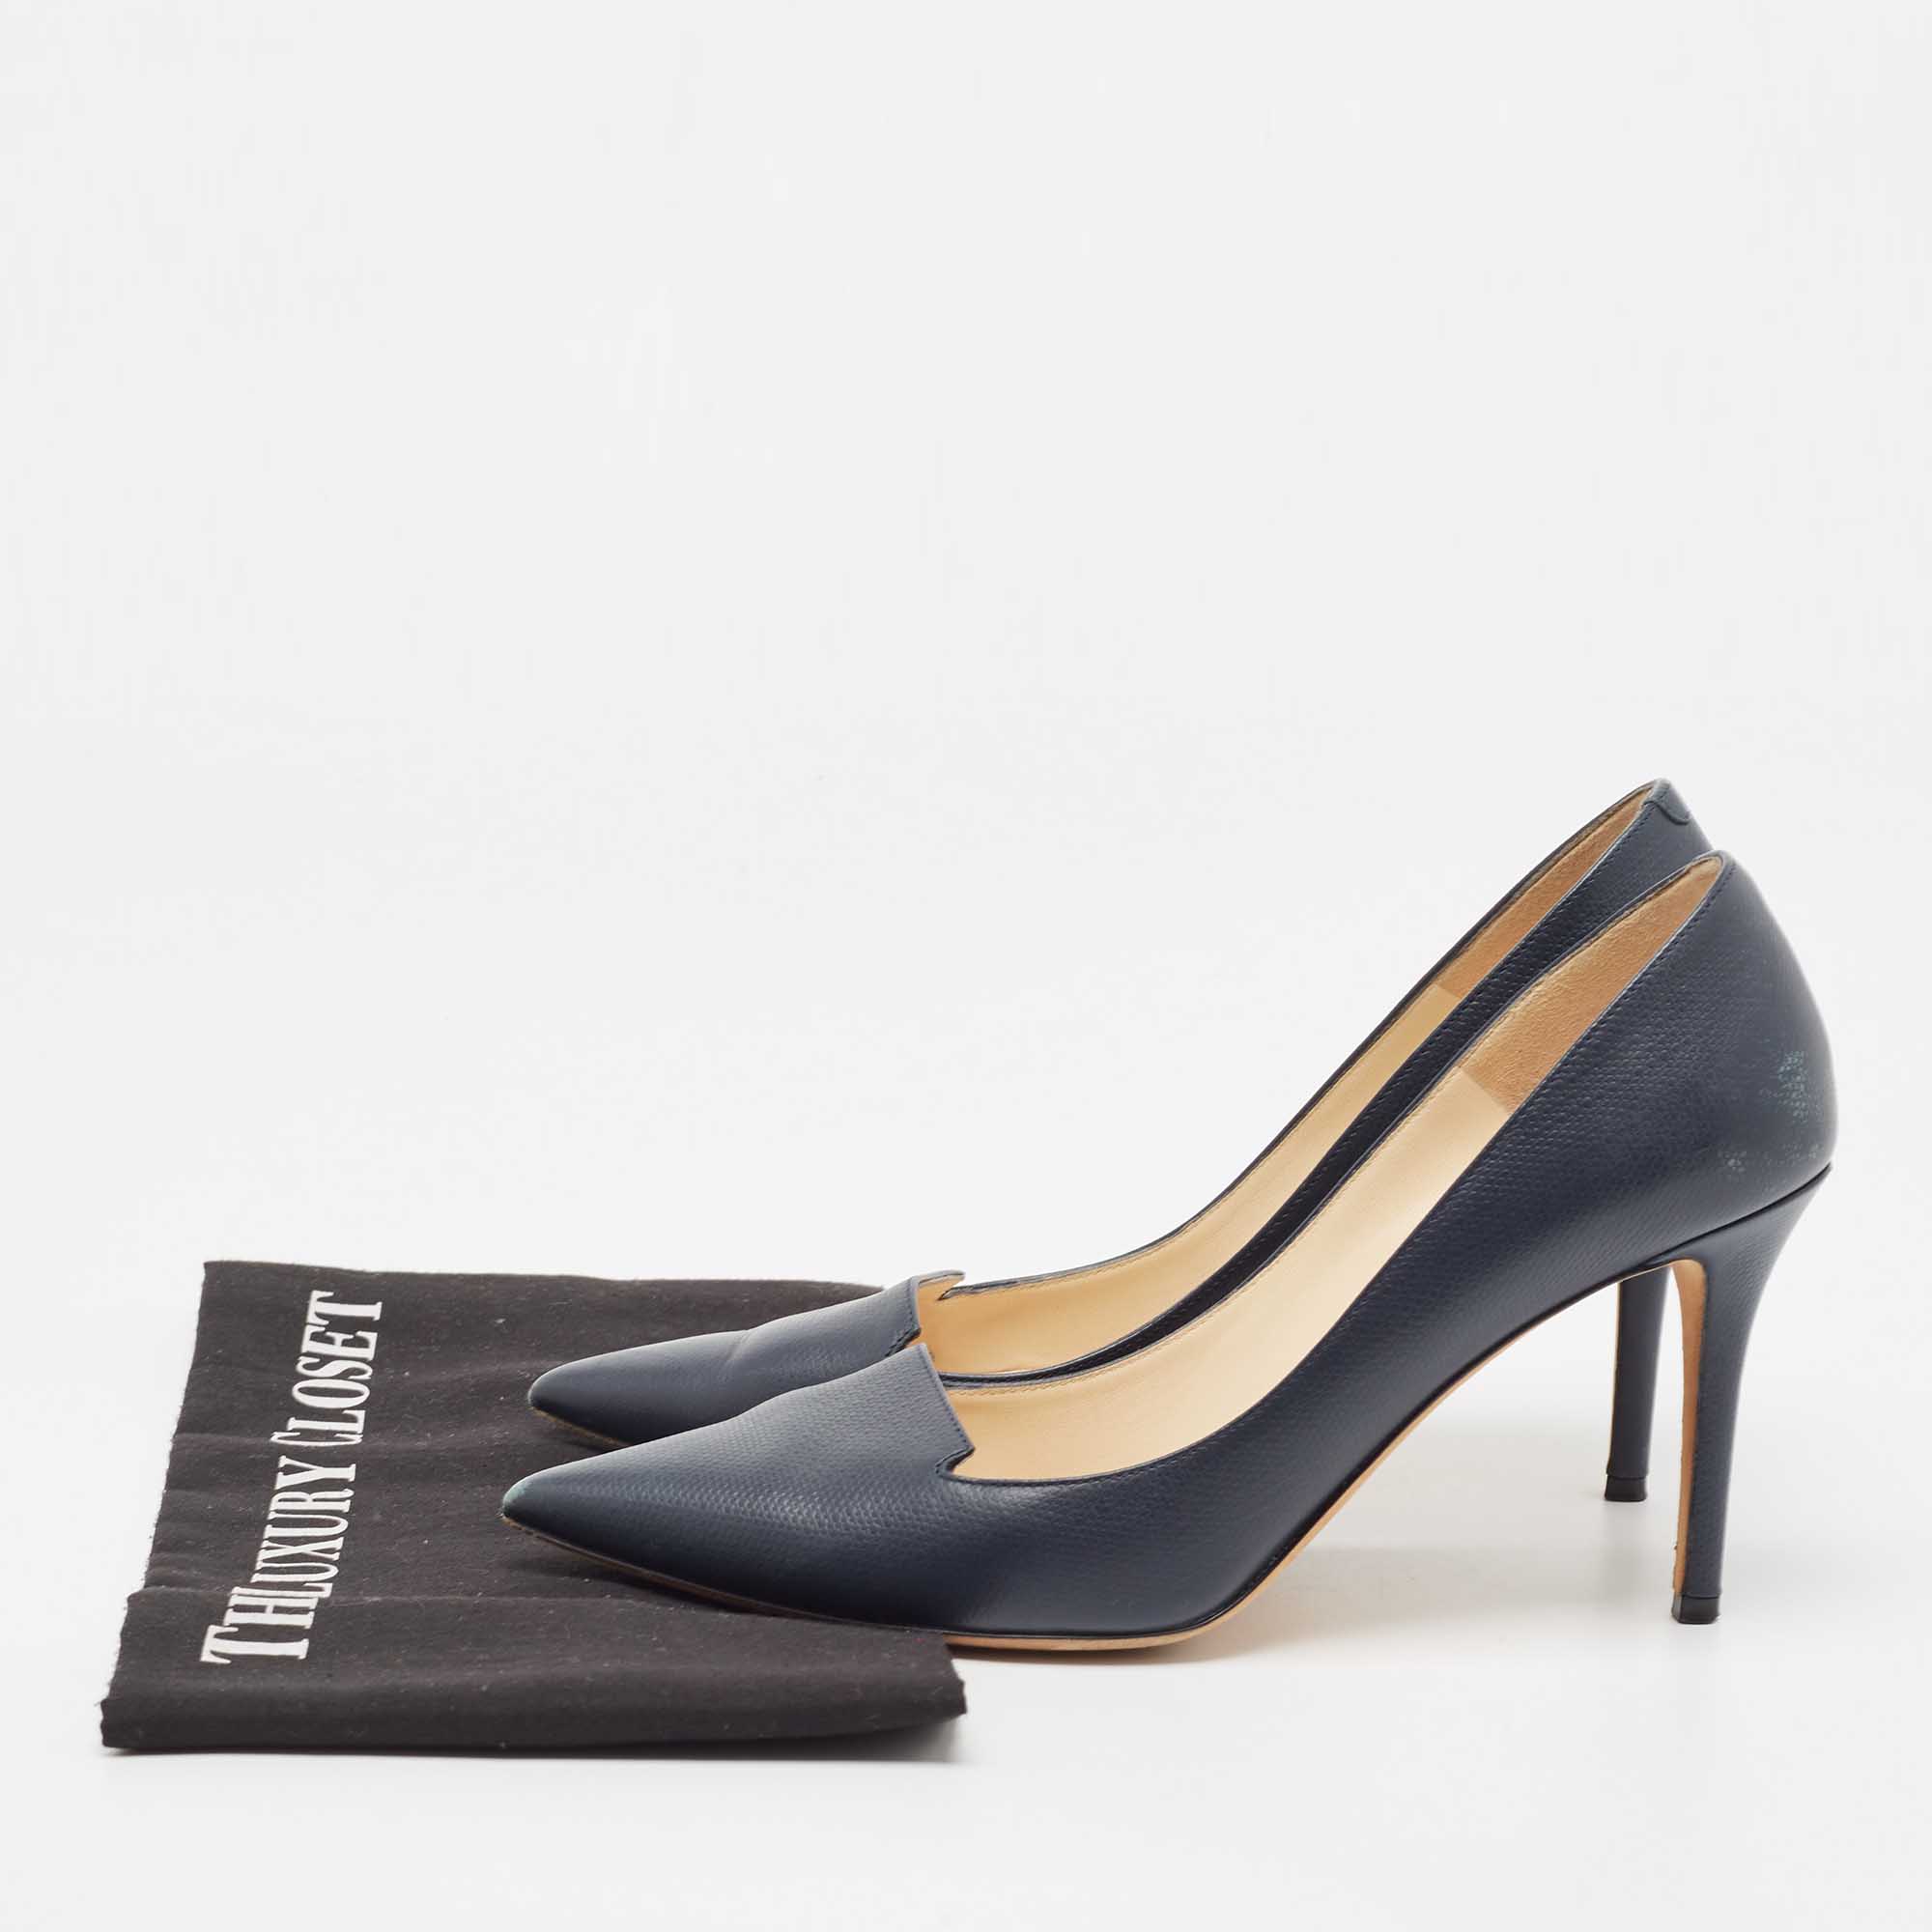 Jimmy Choo Dark Blue Leather Pointed Toe Pumps Size 38.5